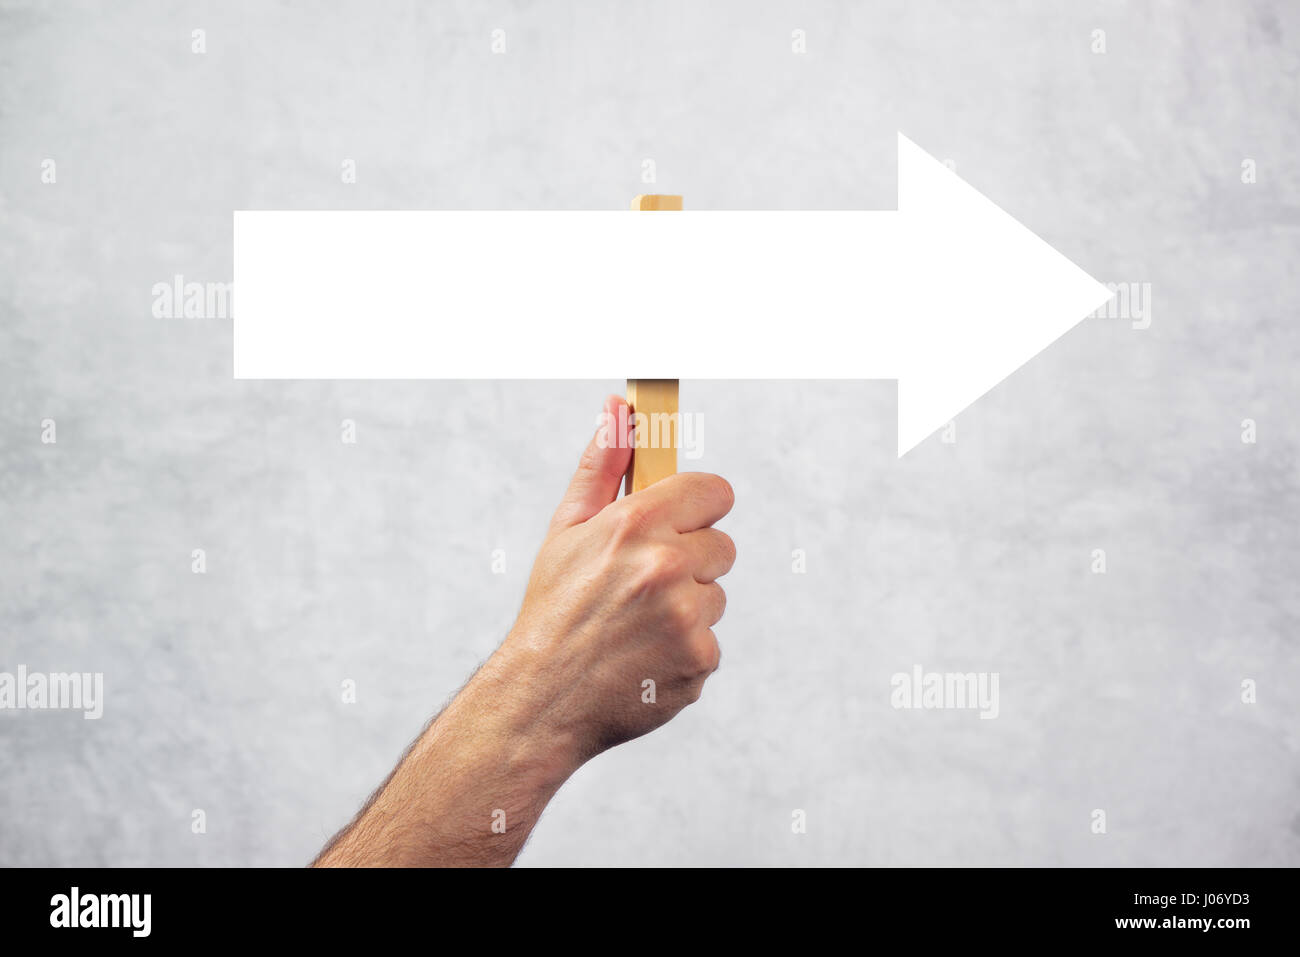 Man holding guiding direction arrow sign in hand, concept of guidance and decision making Stock Photo